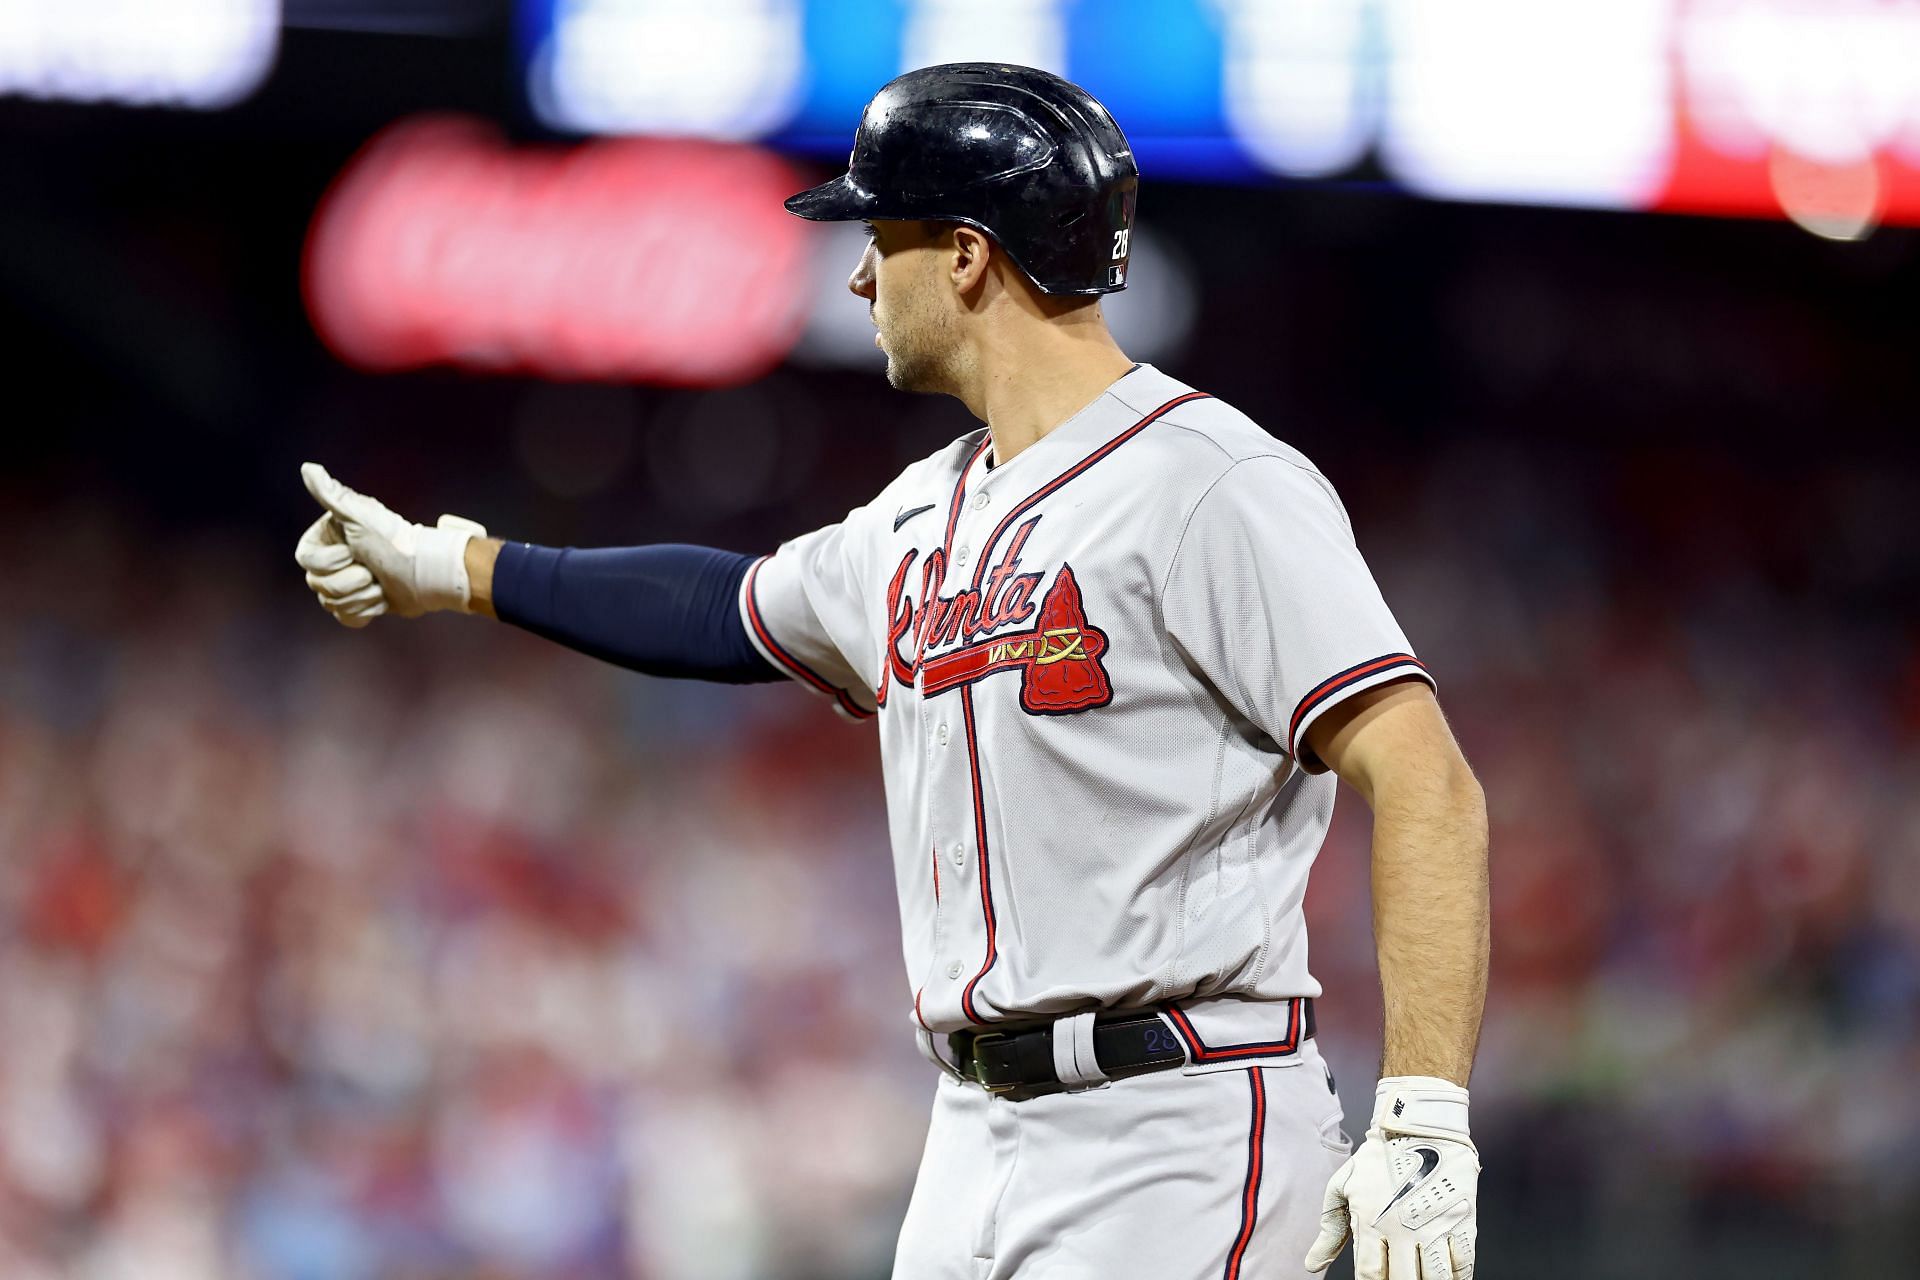 The Braves have good World Series odds